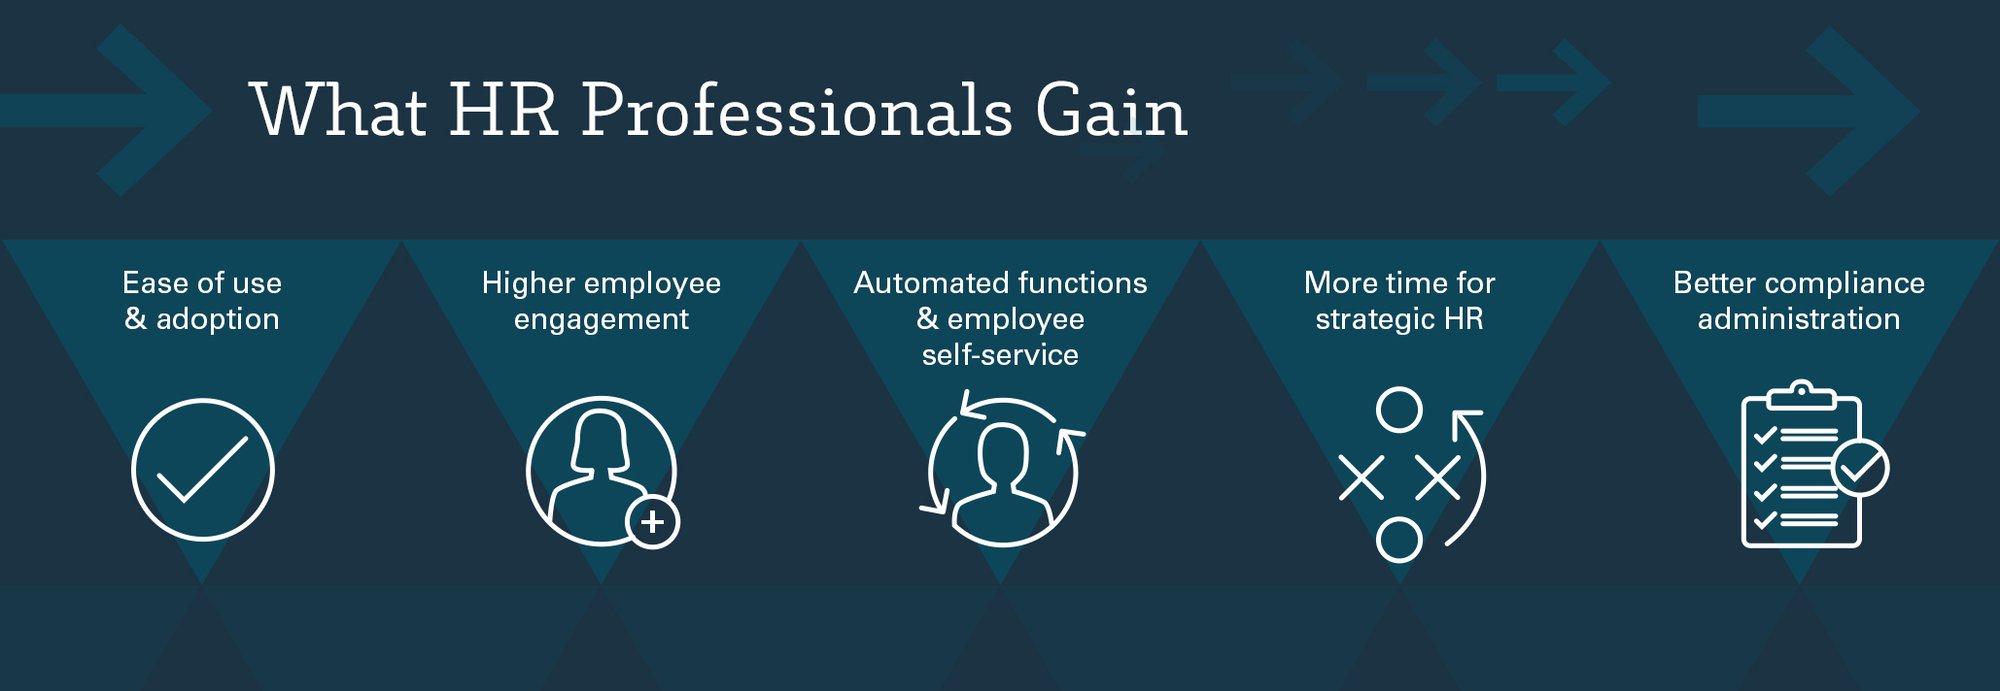 HR Software for HR Professionals infographic